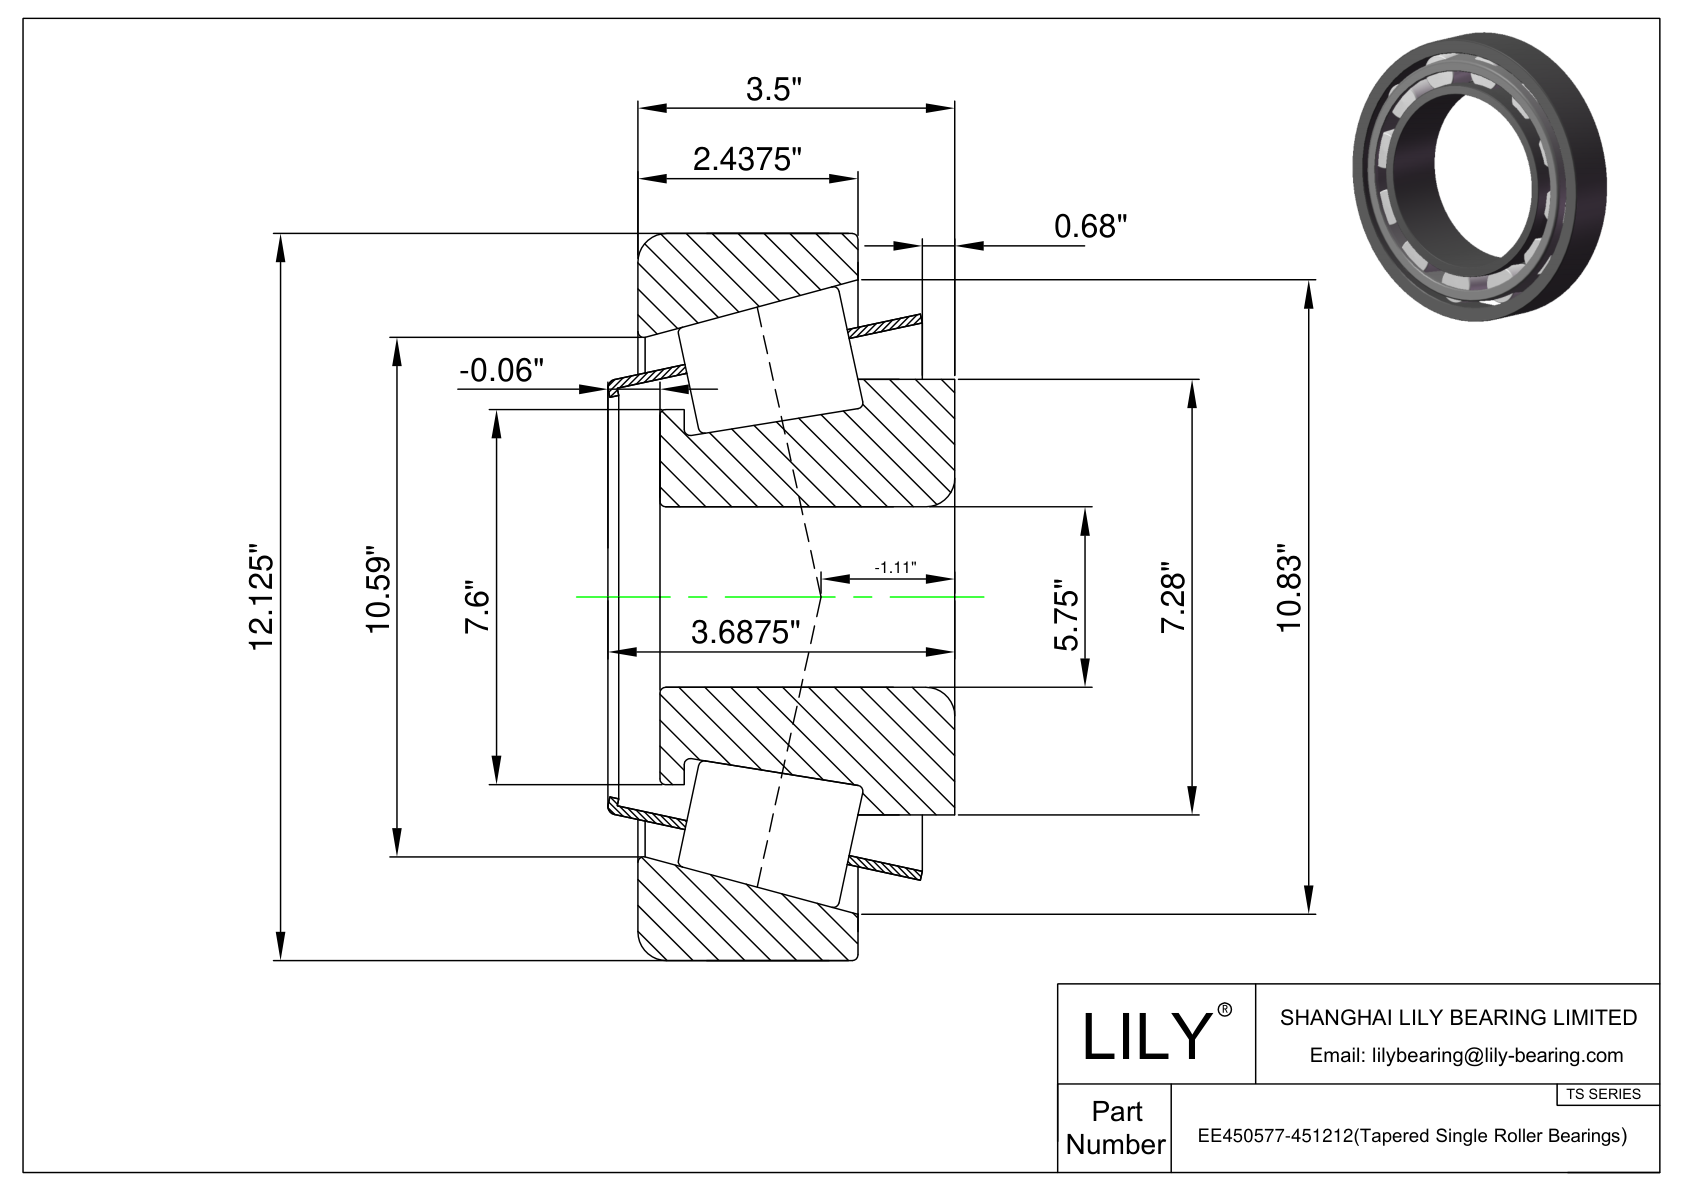 EE450577-451212 TS (Tapered Single Roller Bearings) (Imperial) cad drawing